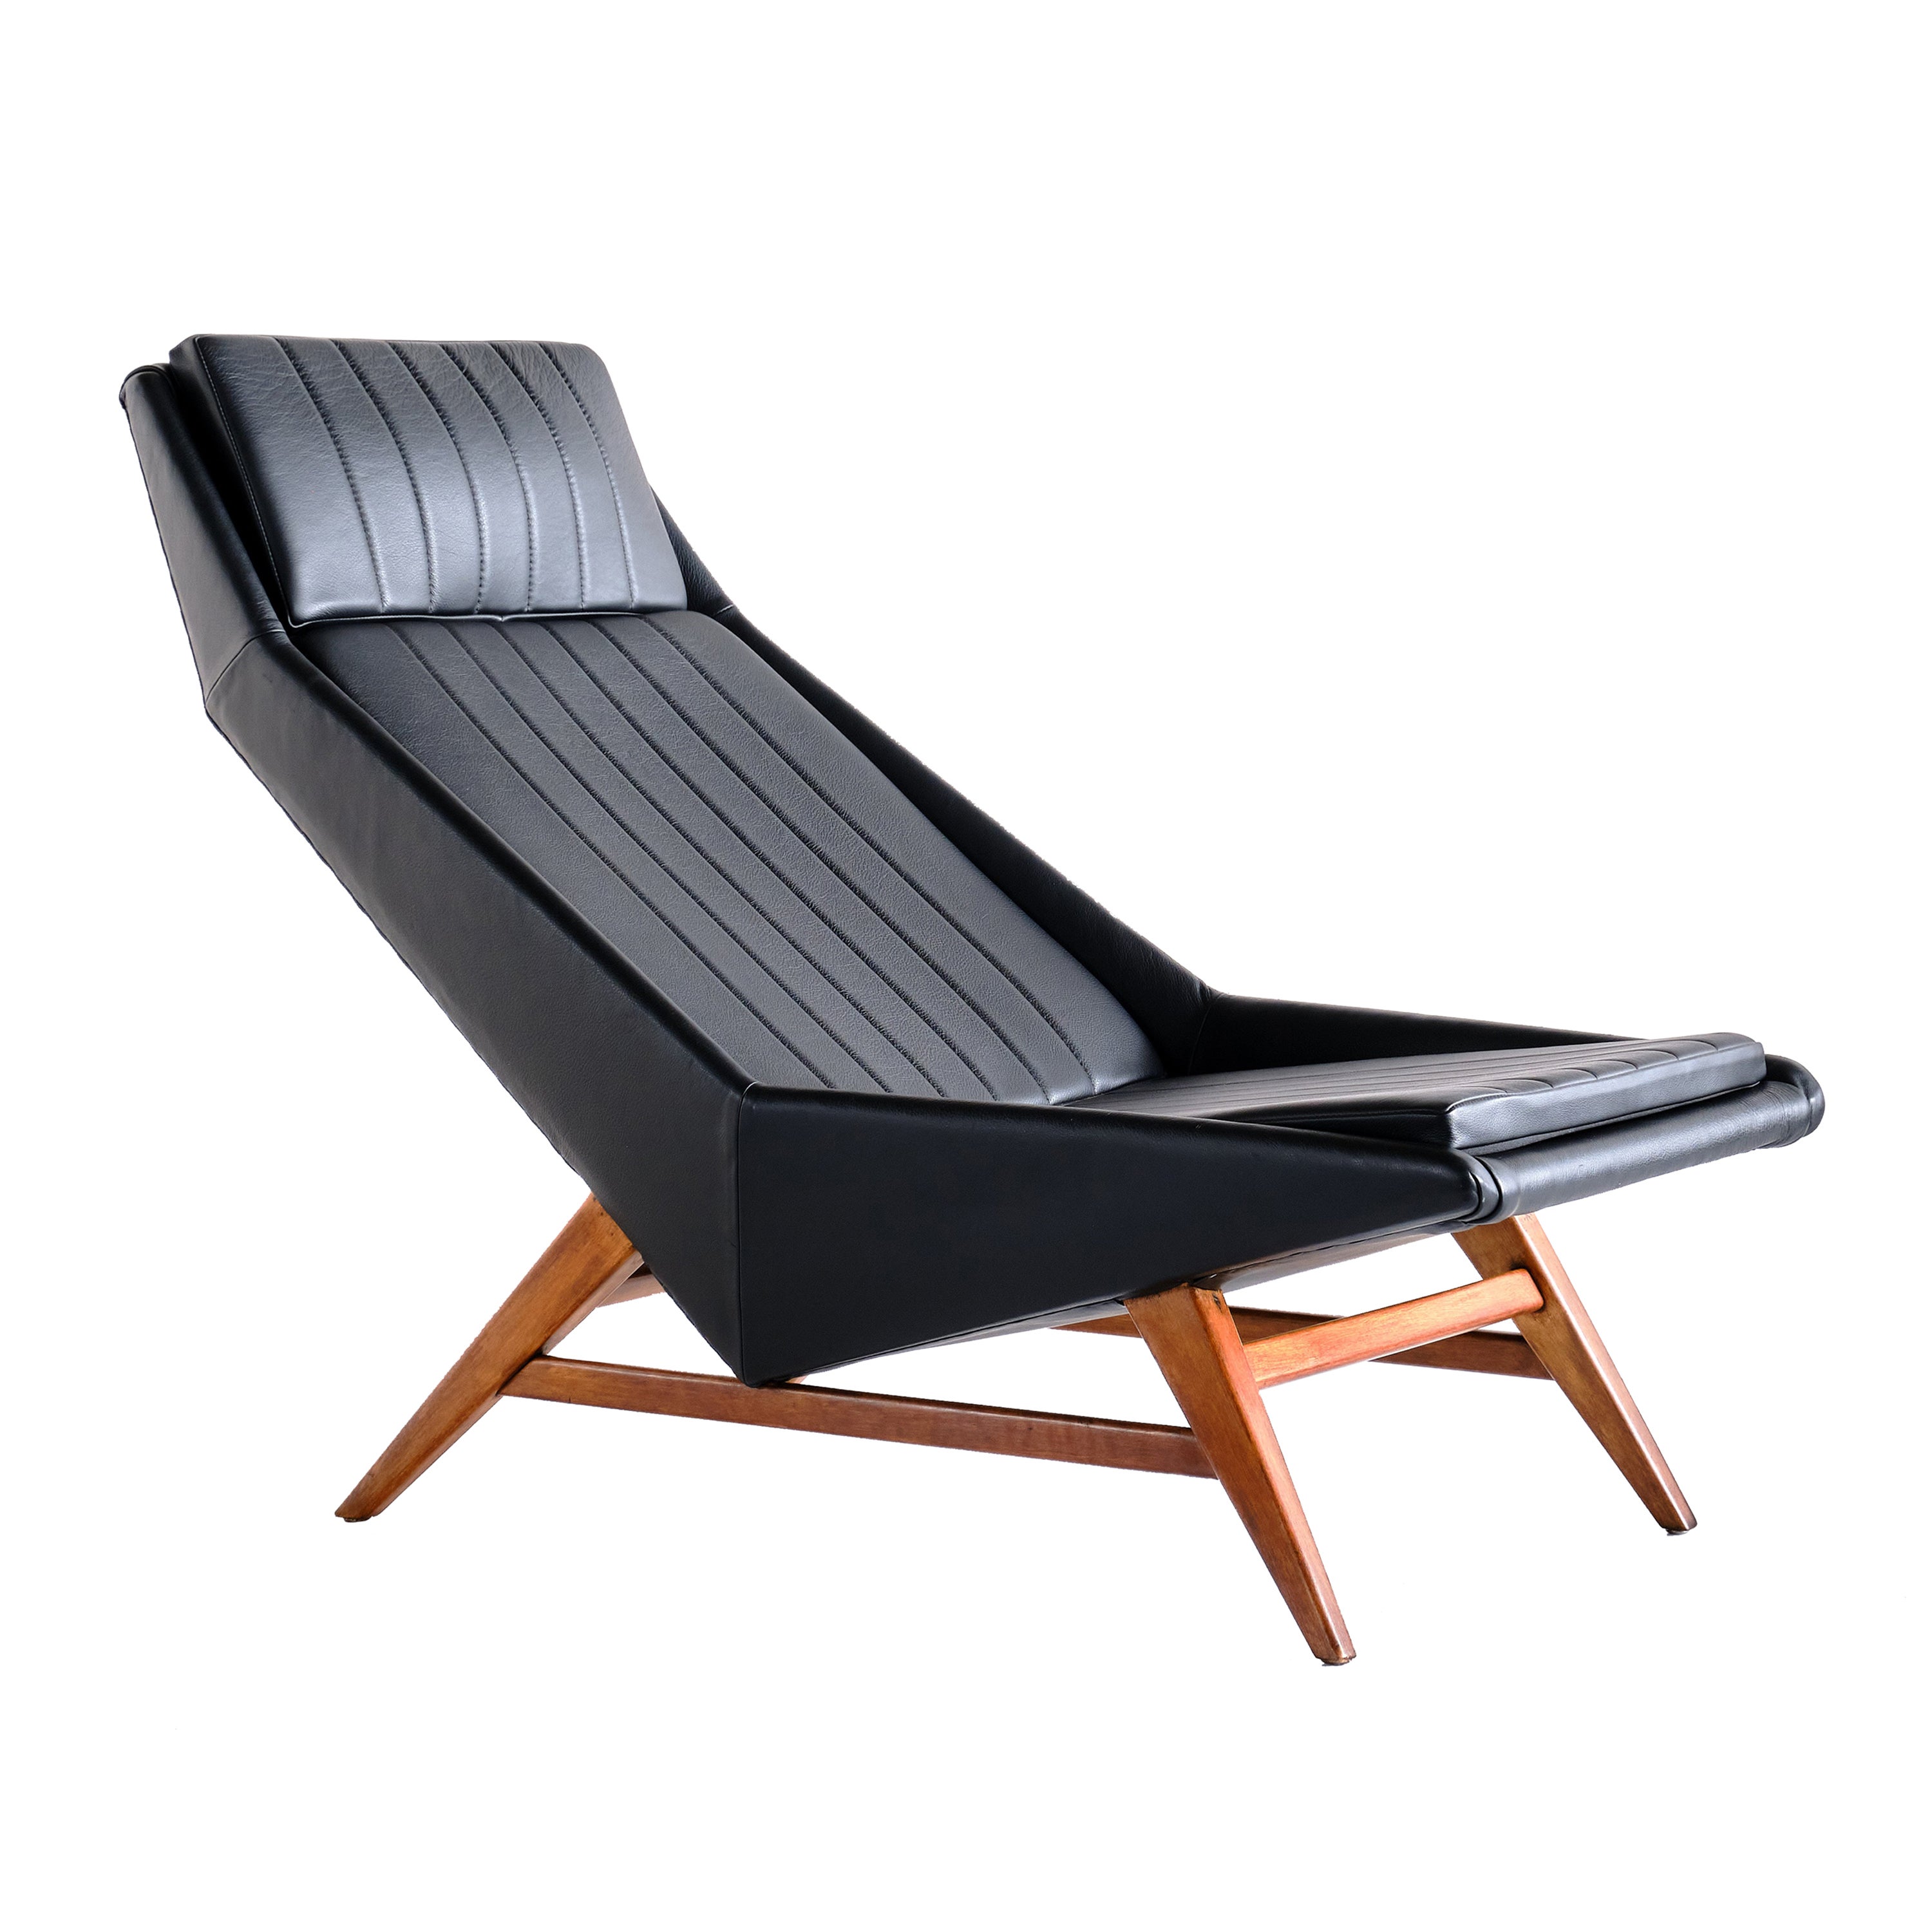 Svante Skogh Lounge Chair in Leather and Beech, AB Hjertquist & Co, Sweden, 1955 For Sale